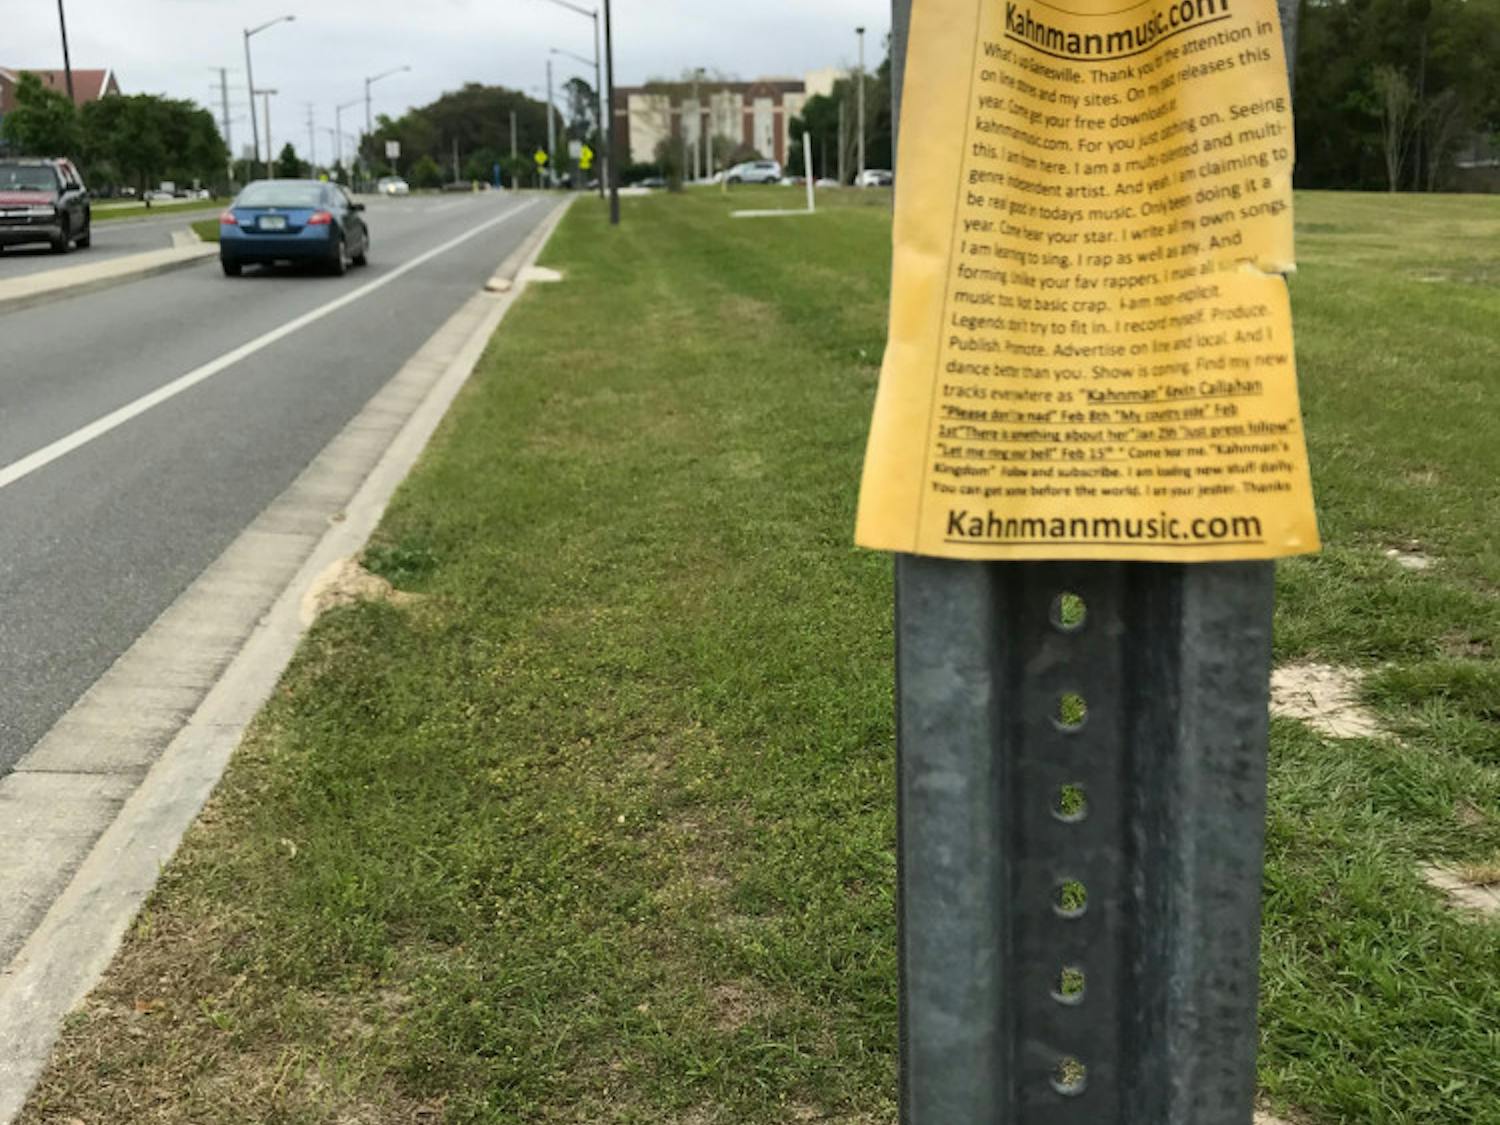 Callahan posted these yellow flyers at bus stops across Gainesville to promote his music.